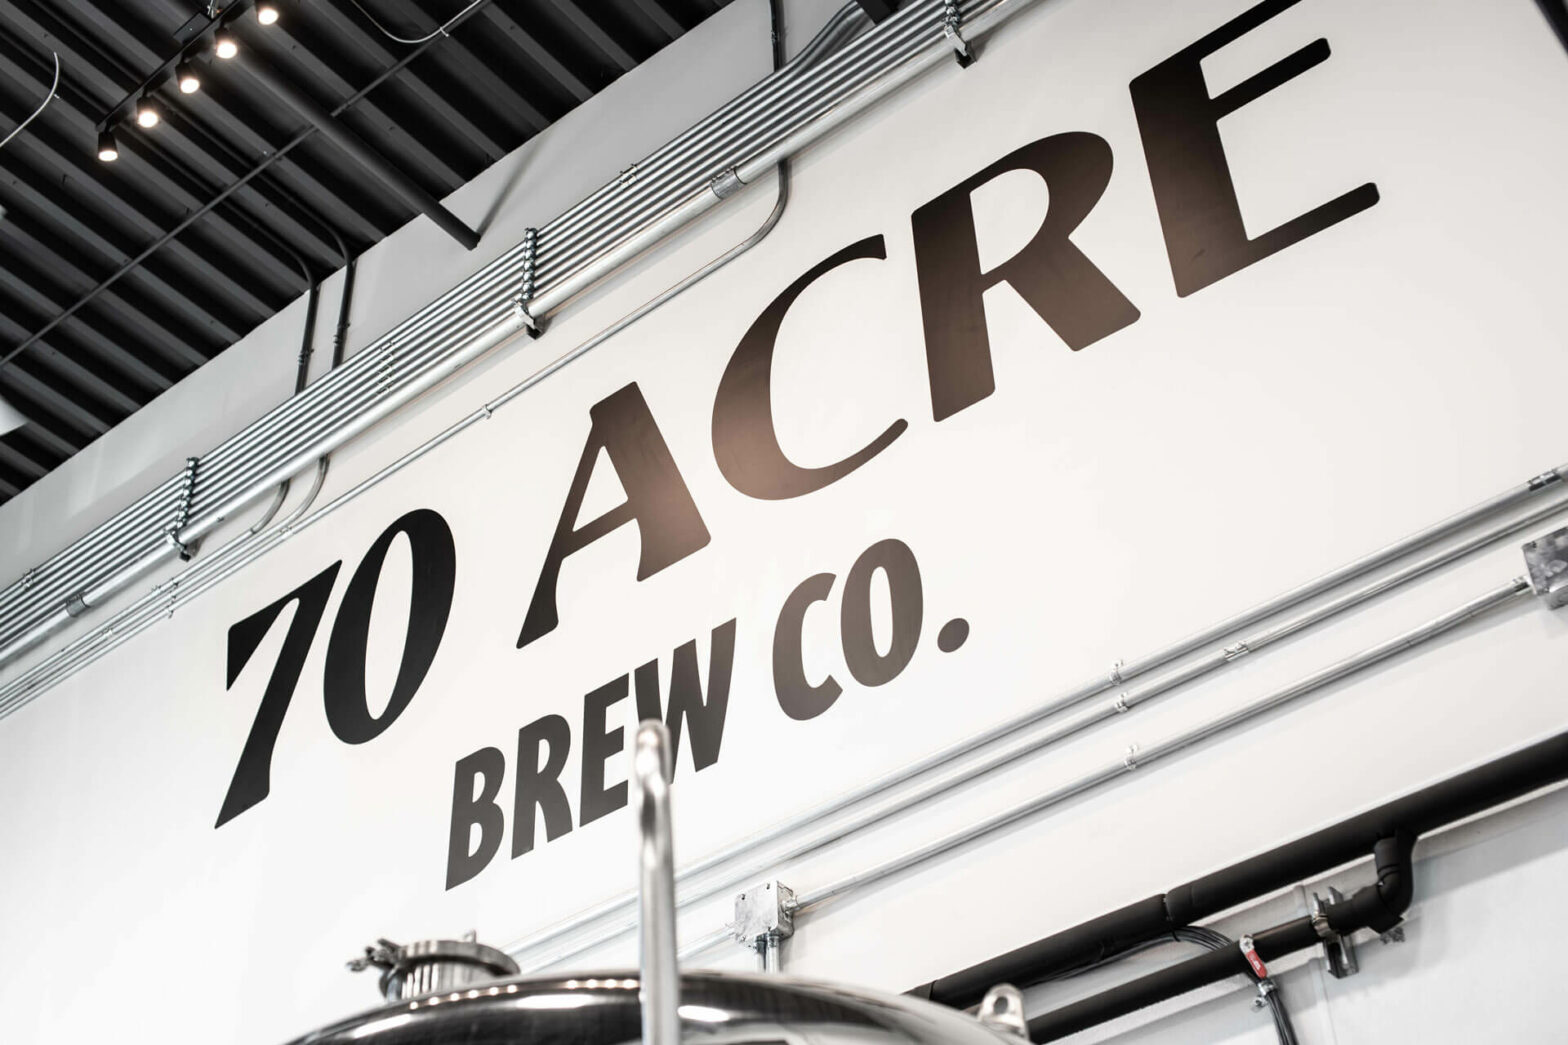 70 Acre logo on the wall of the brewery